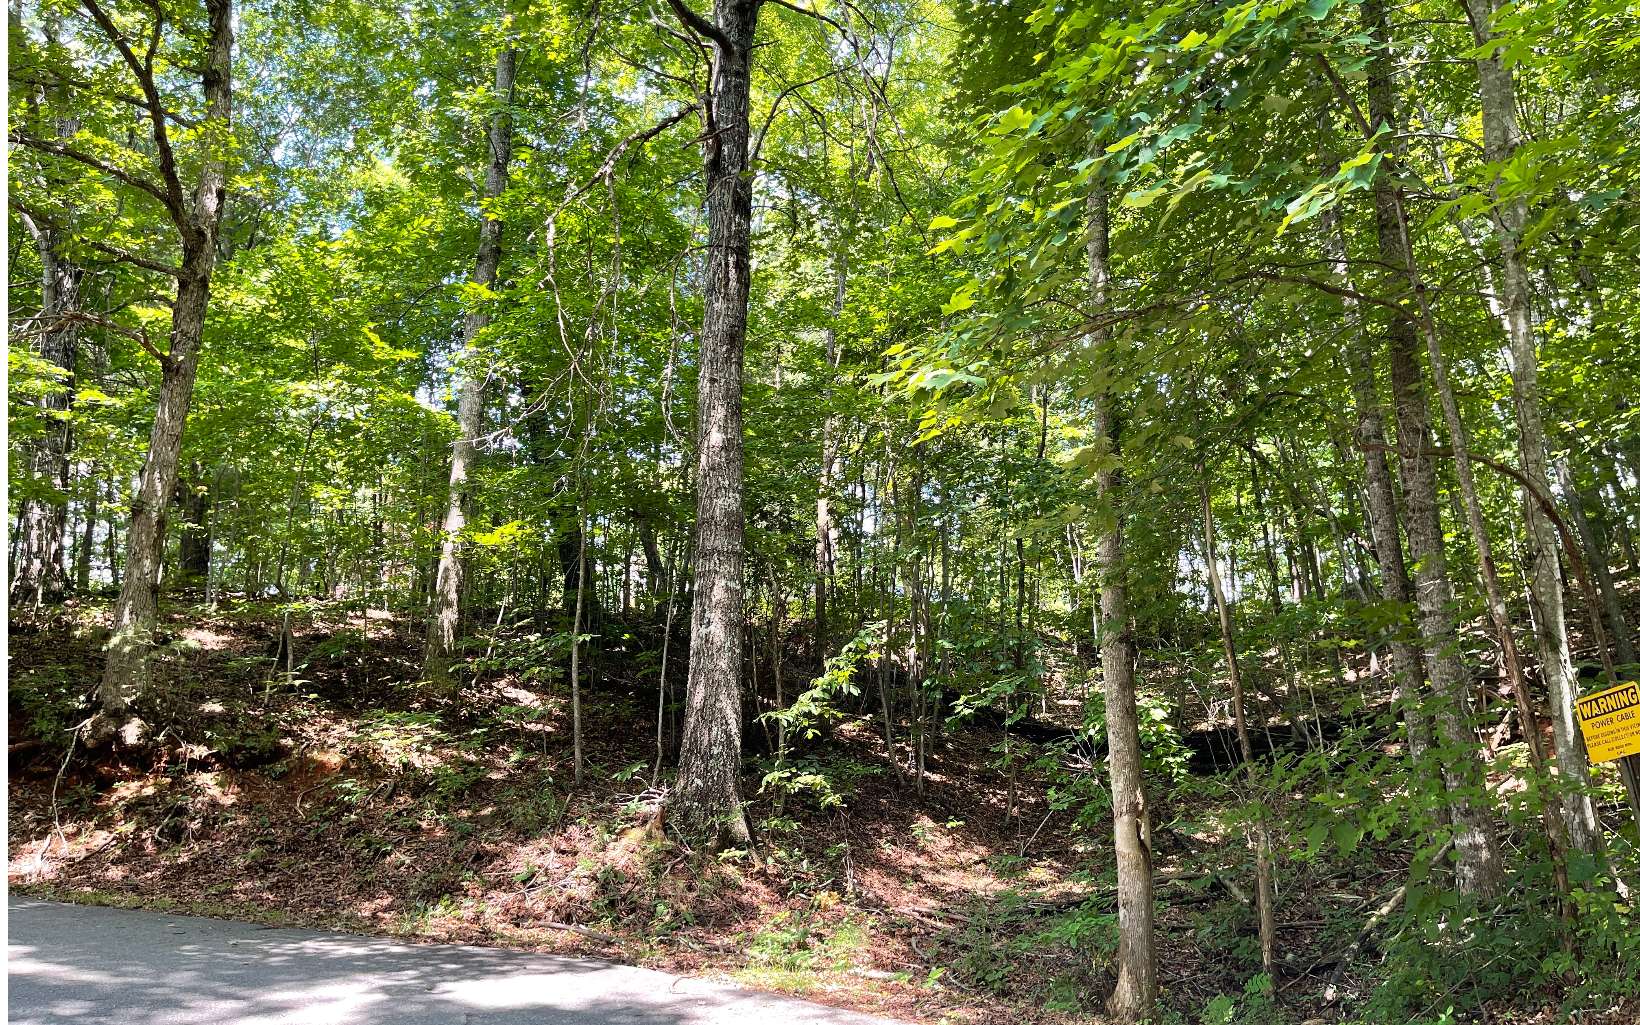 Looking for the perfect lot to build your little mountain getaway? With building restrictions requiring a minimum of only 800 sf, this is it! This 0.76 acre lot is located in the heart of downtown Hiawassee, near dining & shopping as well as Lake Chatuge. Beautiful views overlooking town, with the mountains in the background. Lot 10 also available.